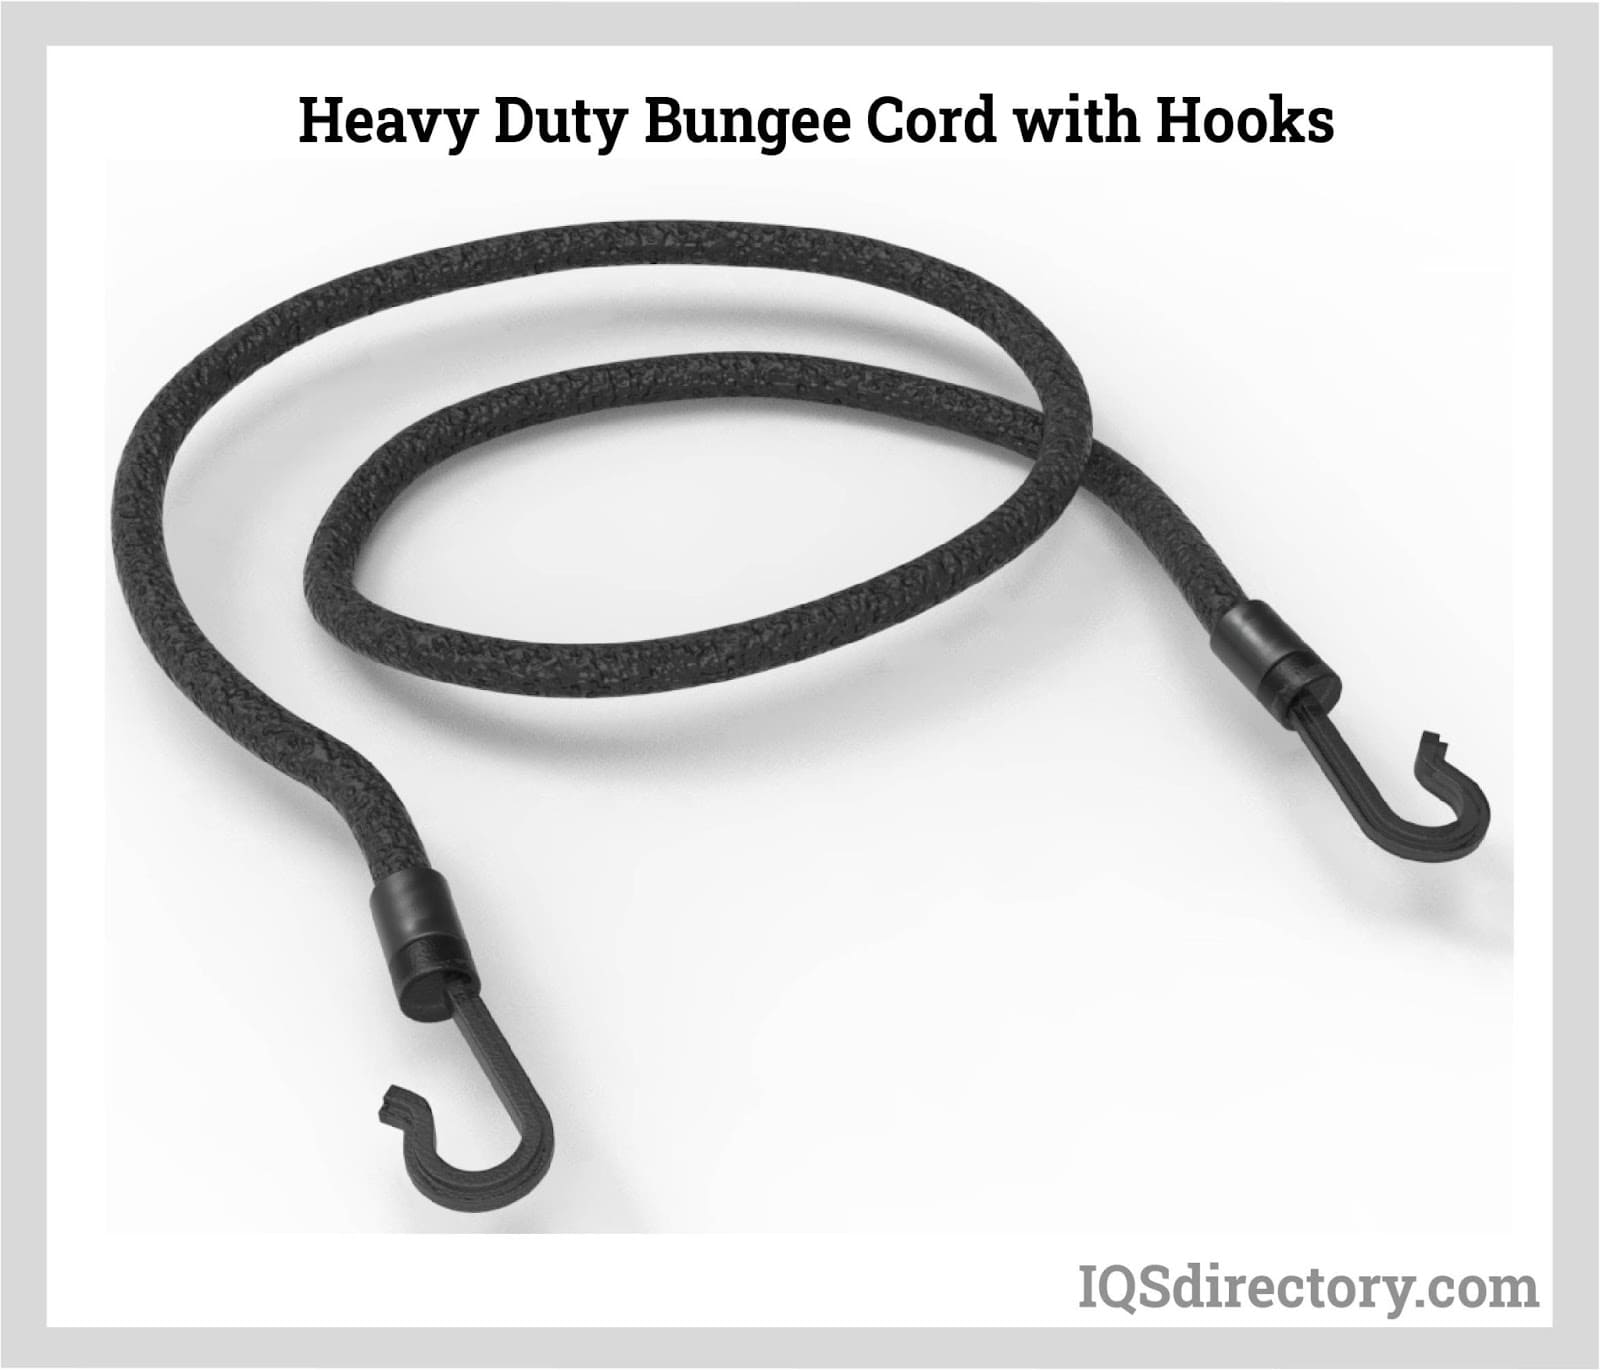 Heavy Duty Bungee Cord with Hooks